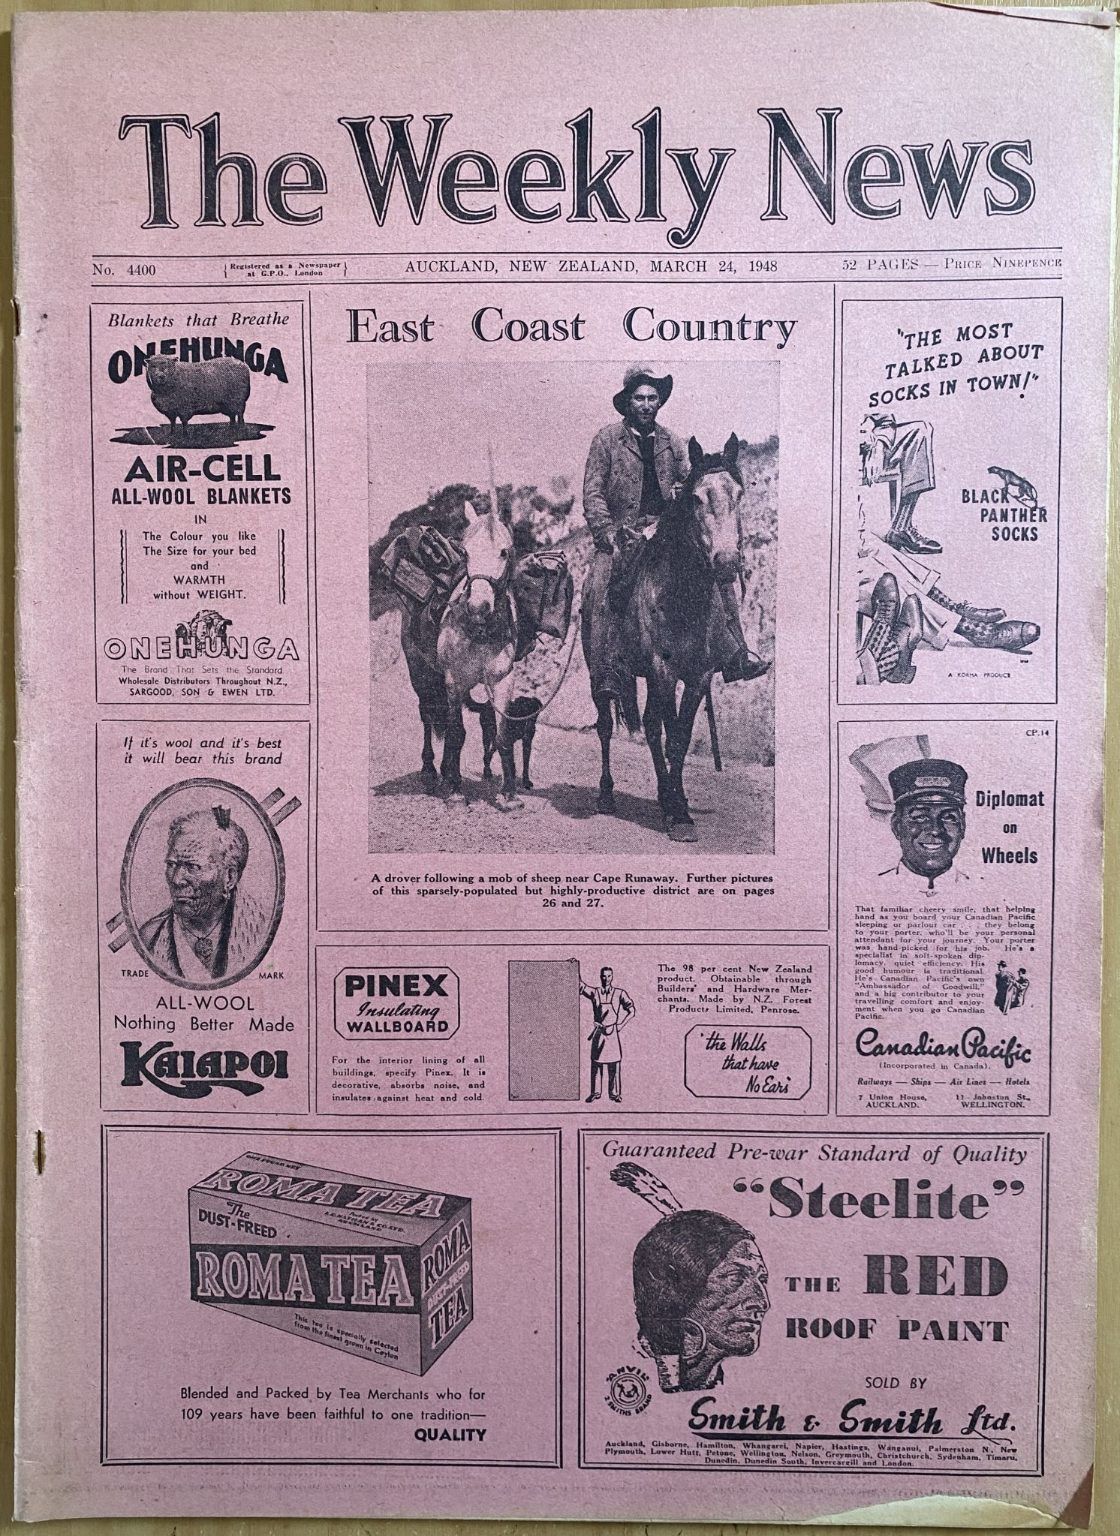 OLD NEWSPAPER: The Weekly News - No. 4400, 24 March 1948